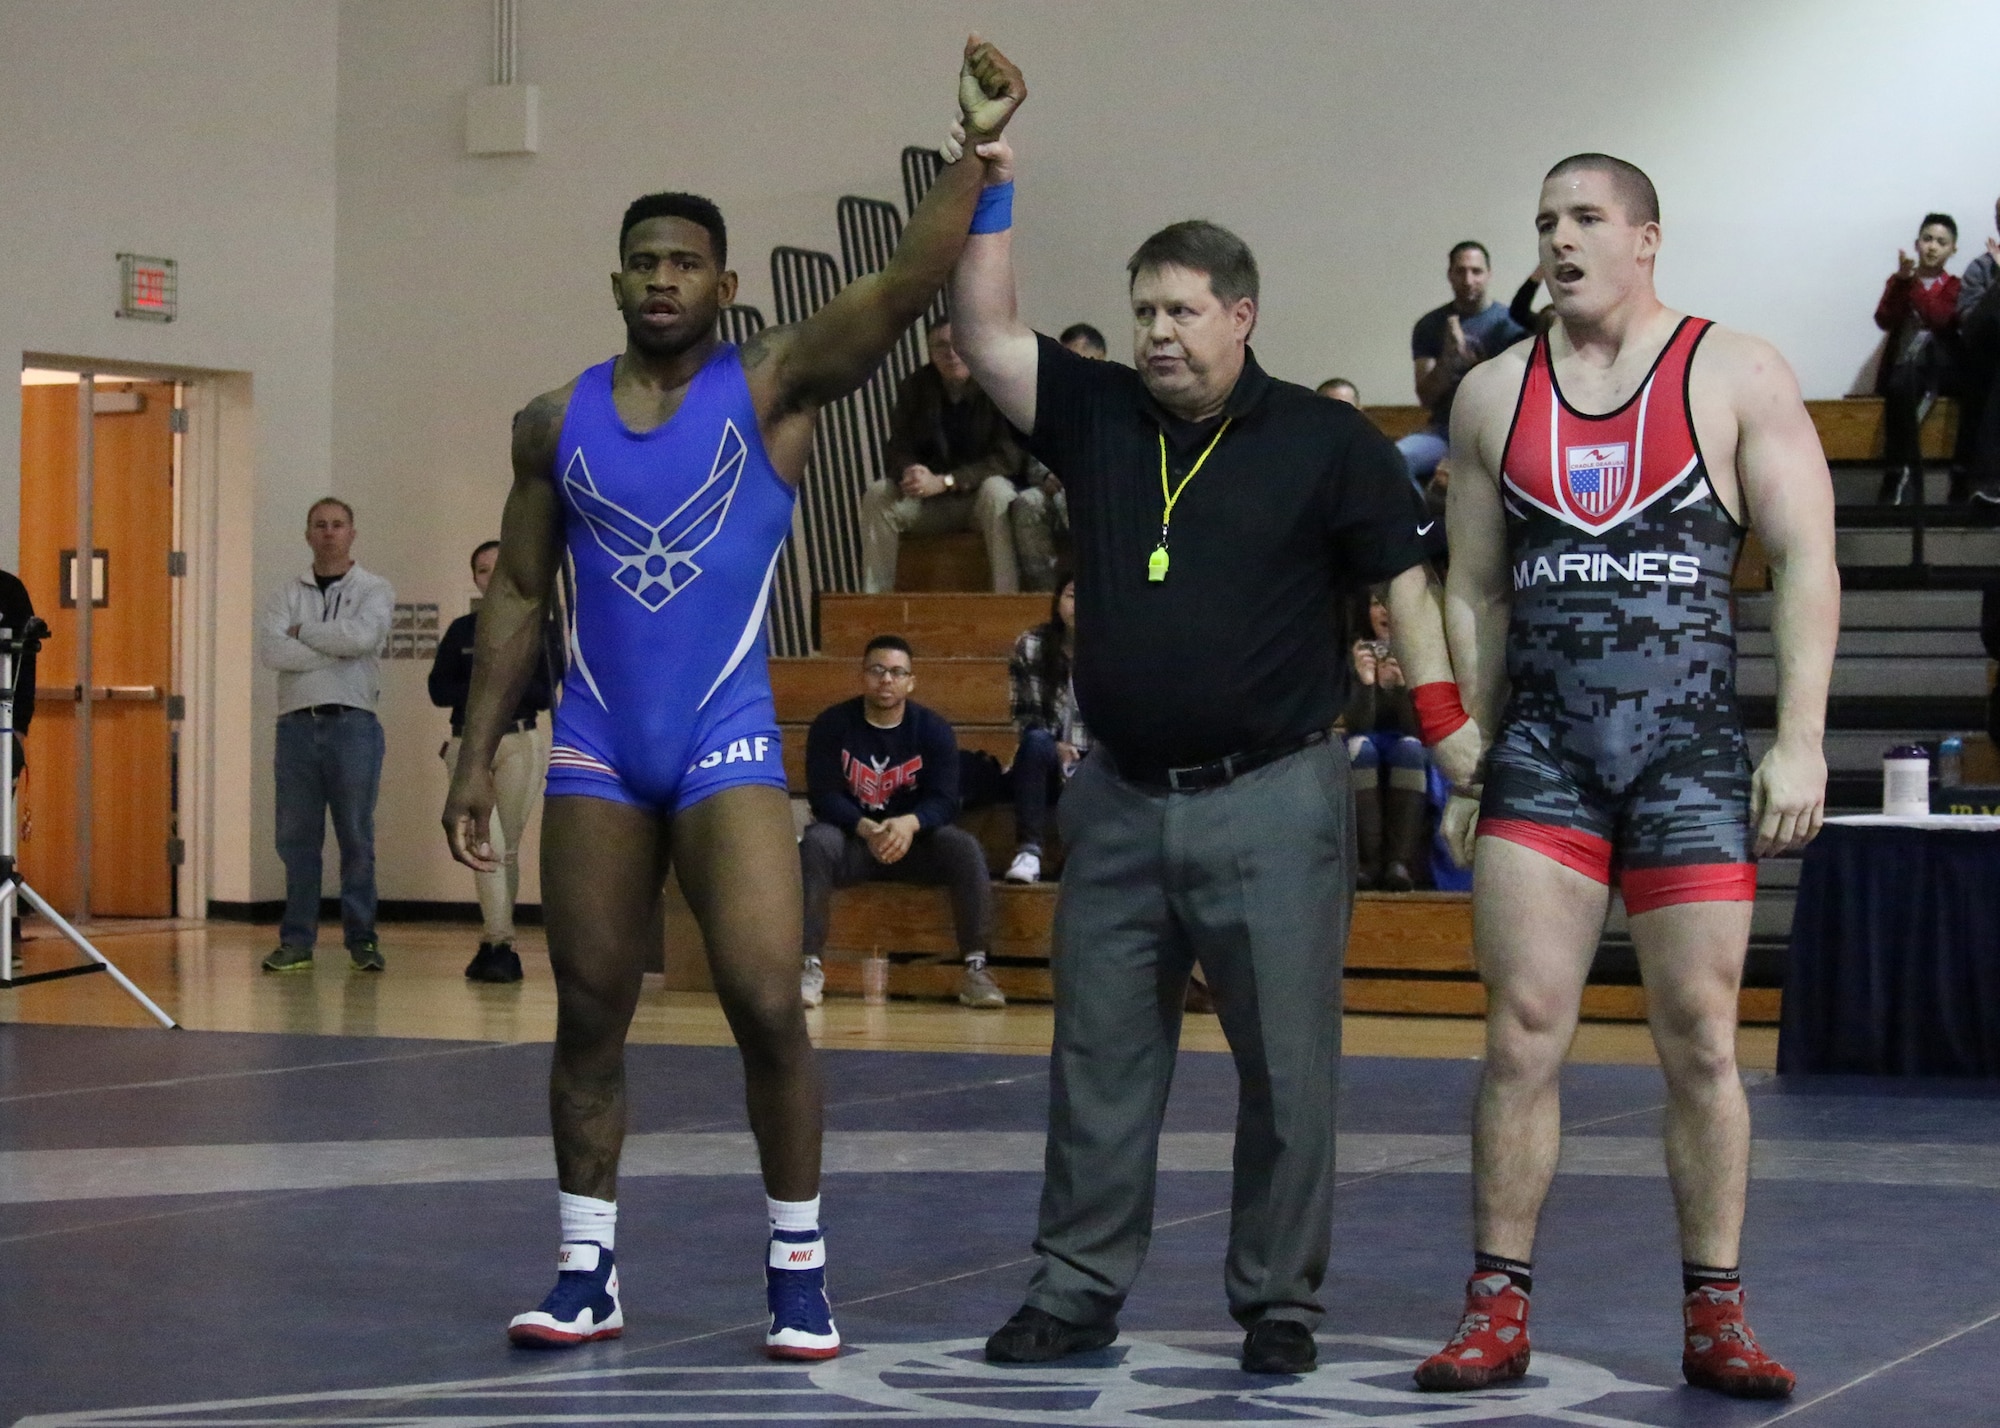 Senior Airman Brandon Johnson is declared the victor in a match with Marine Michael Brant at the 2017 Armed Forces Championship Febuary 26, 2017, at Joint Base McGuire-Dix-Lakehurst, NJ. (U.S Air Force courtesy photo)